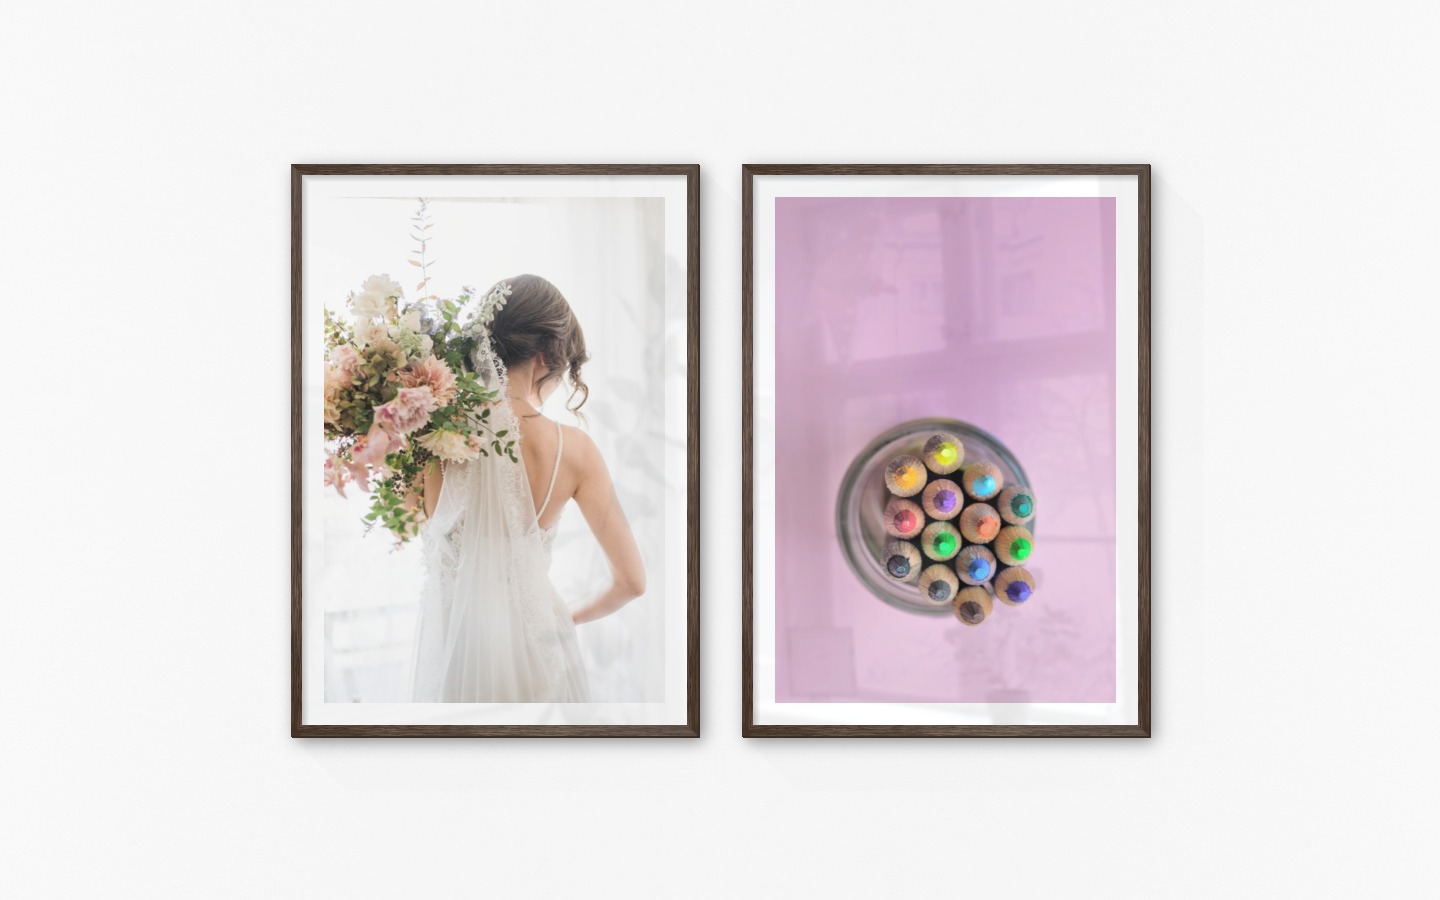 Gallery wall with picture frames in dark wood in sizes 70x100 with prints "Bride and flowers" and "Canned pens"